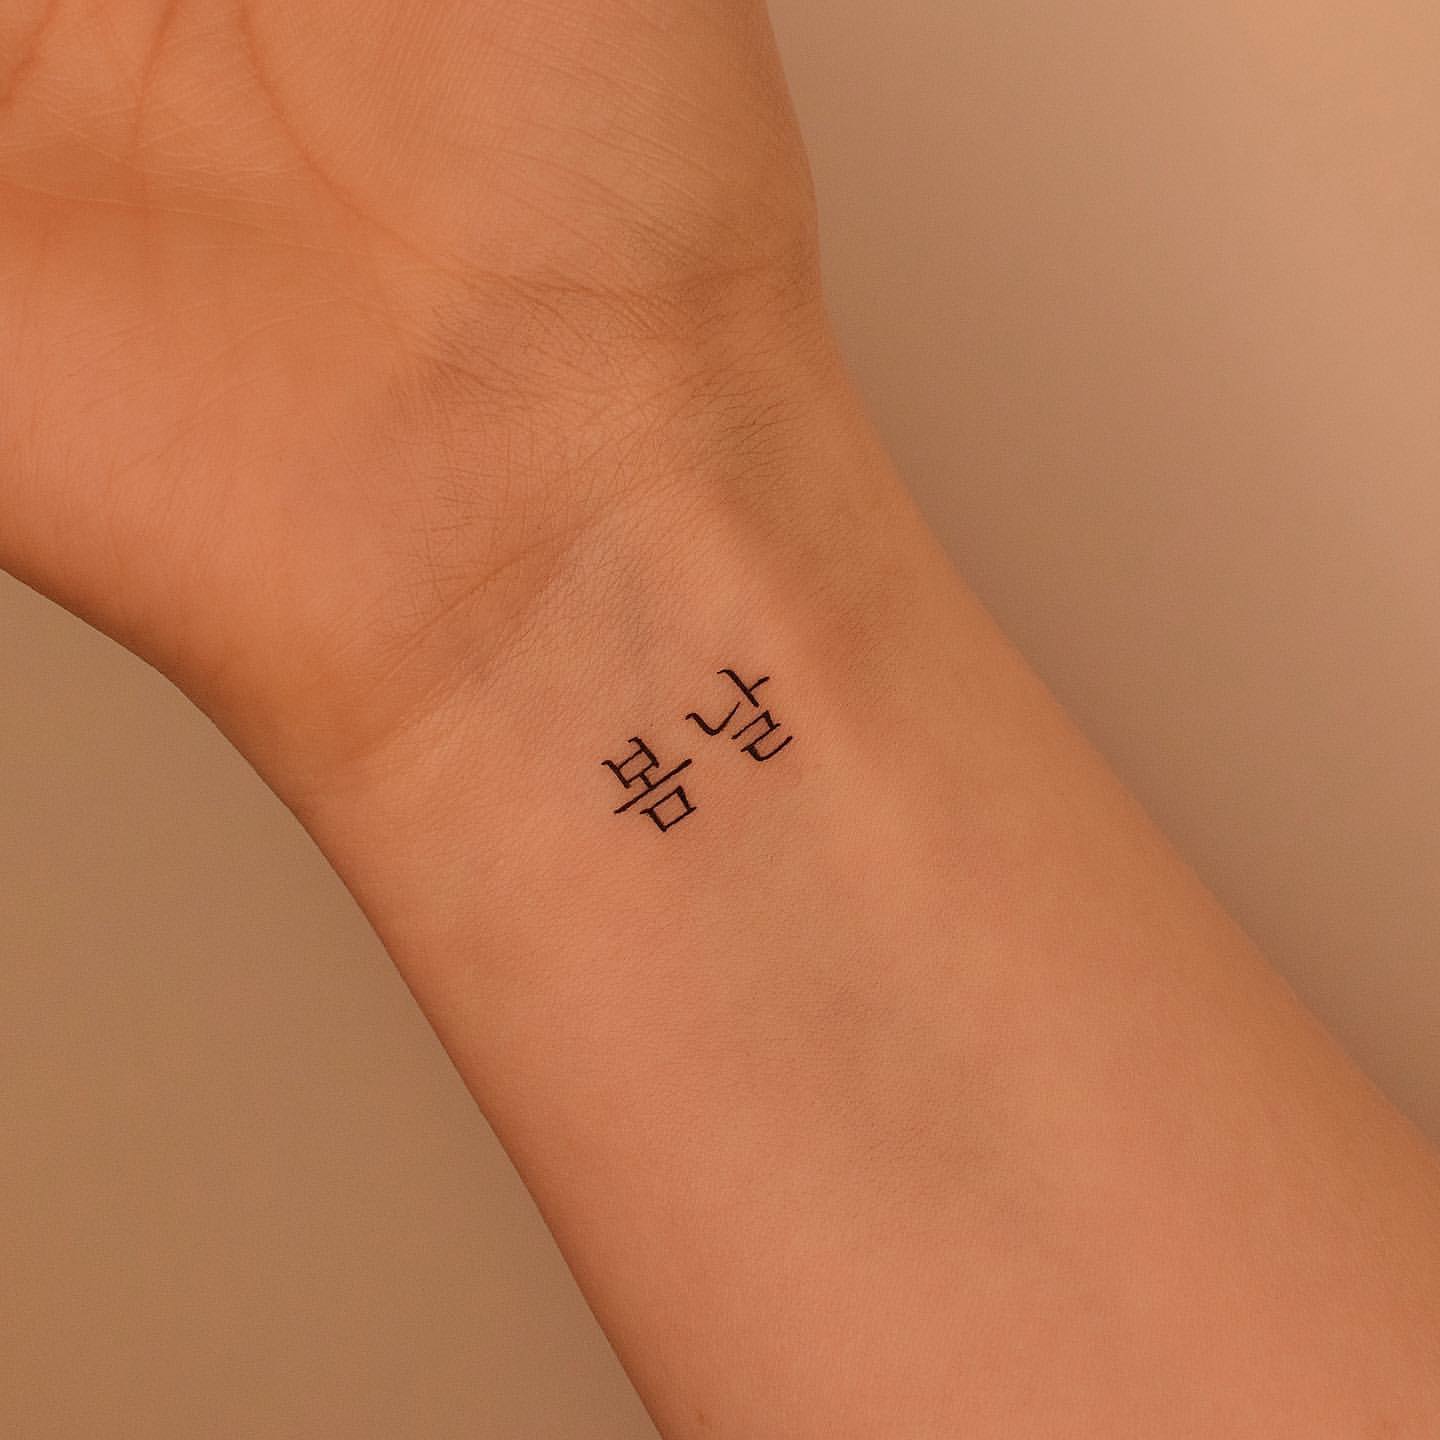 Small Tattoos for Women 28